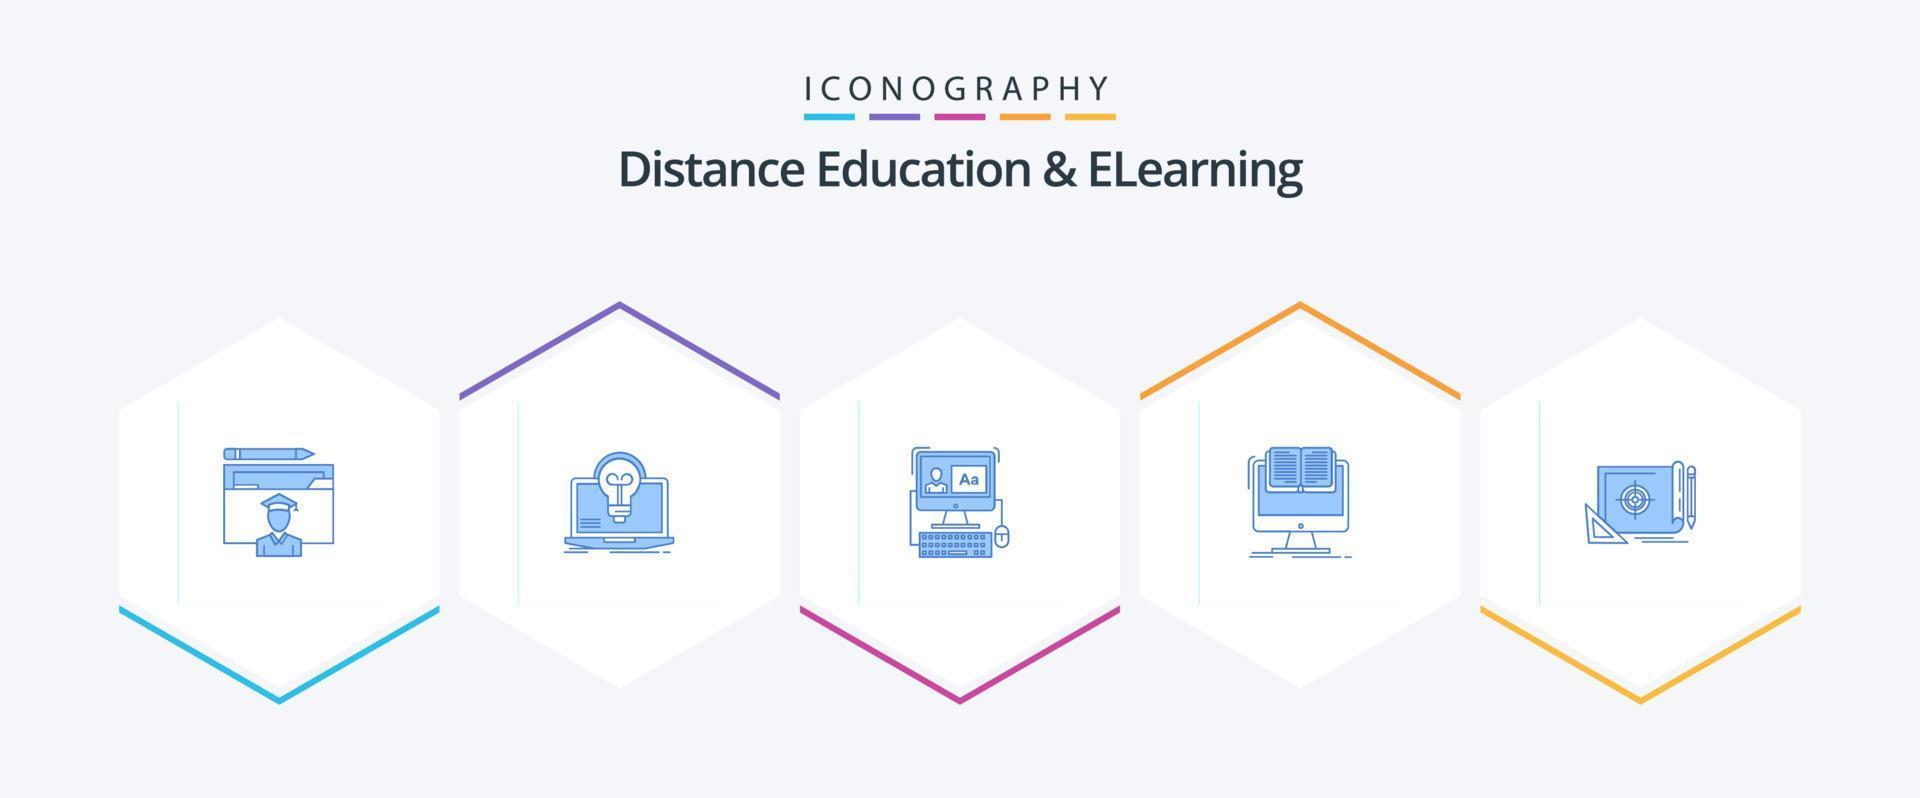 Distance Education And Elearning 25 Blue icon pack including cv. file. screen. document. software vector